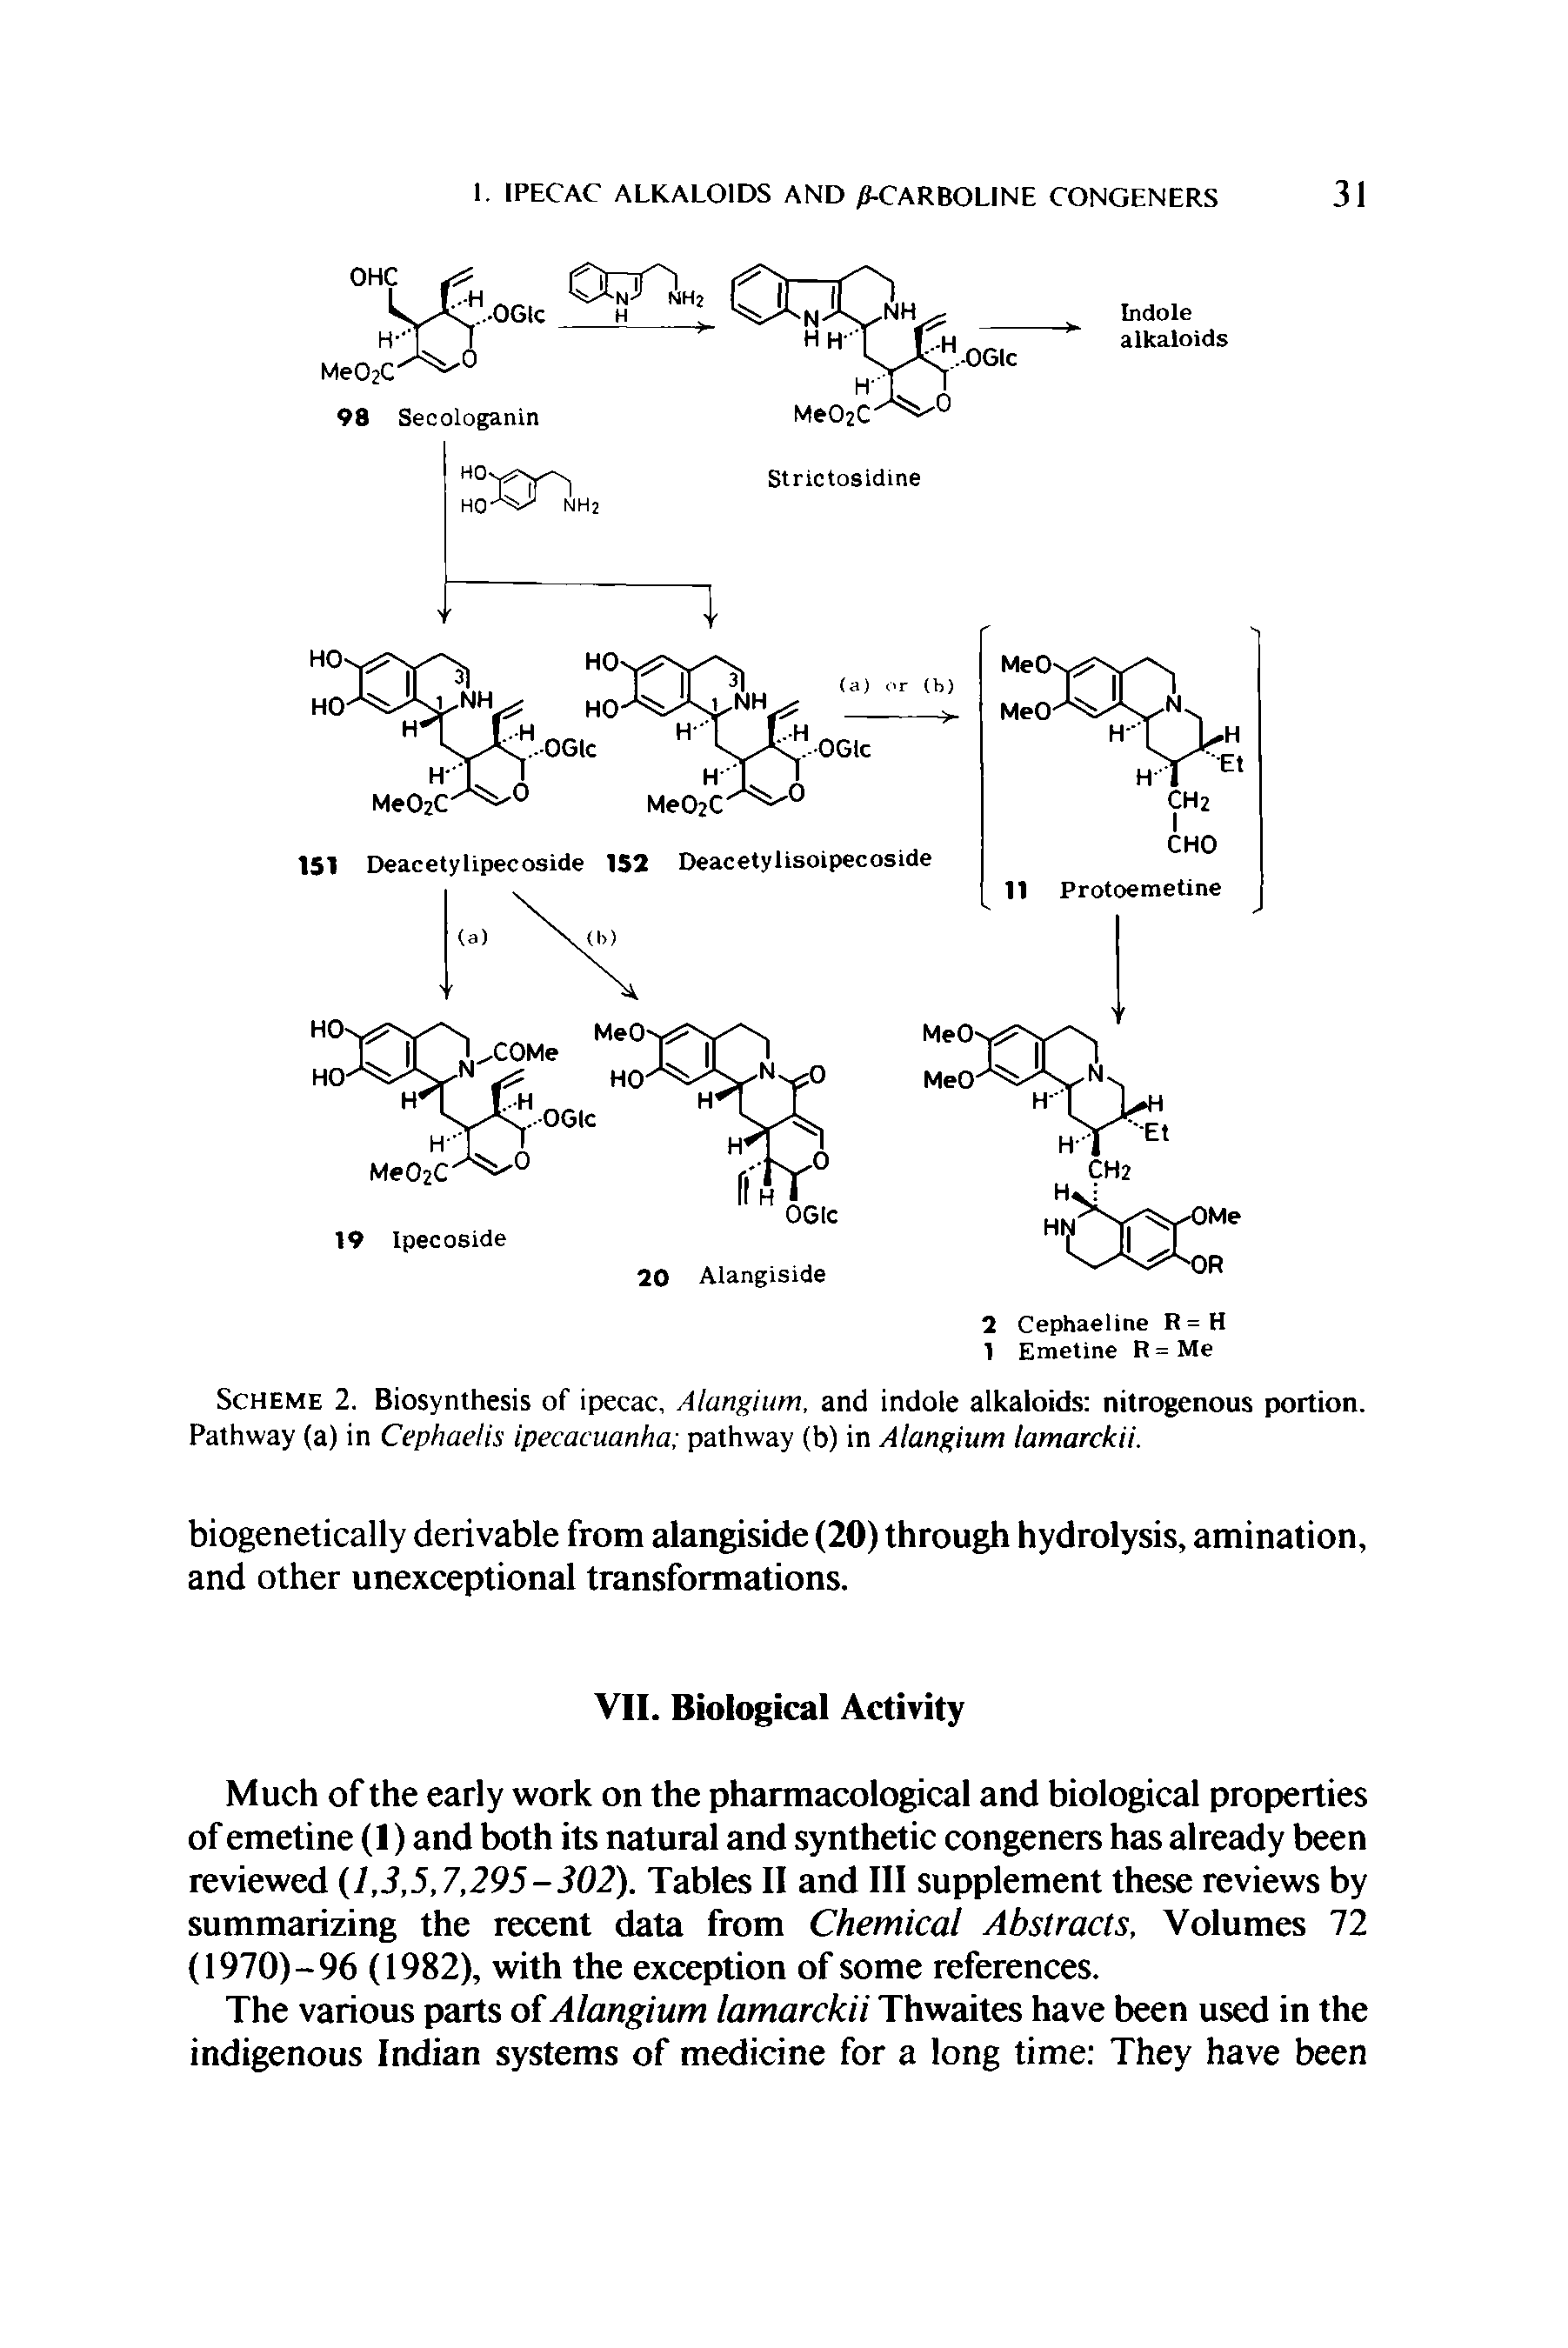 Scheme 2. Biosynthesis of ipecac, Alangium, and indole alkaloids nitrogenous portion. Pathway (a) in Cephaelis ipecacuanha pathway (b) in Alangium lamarckii.